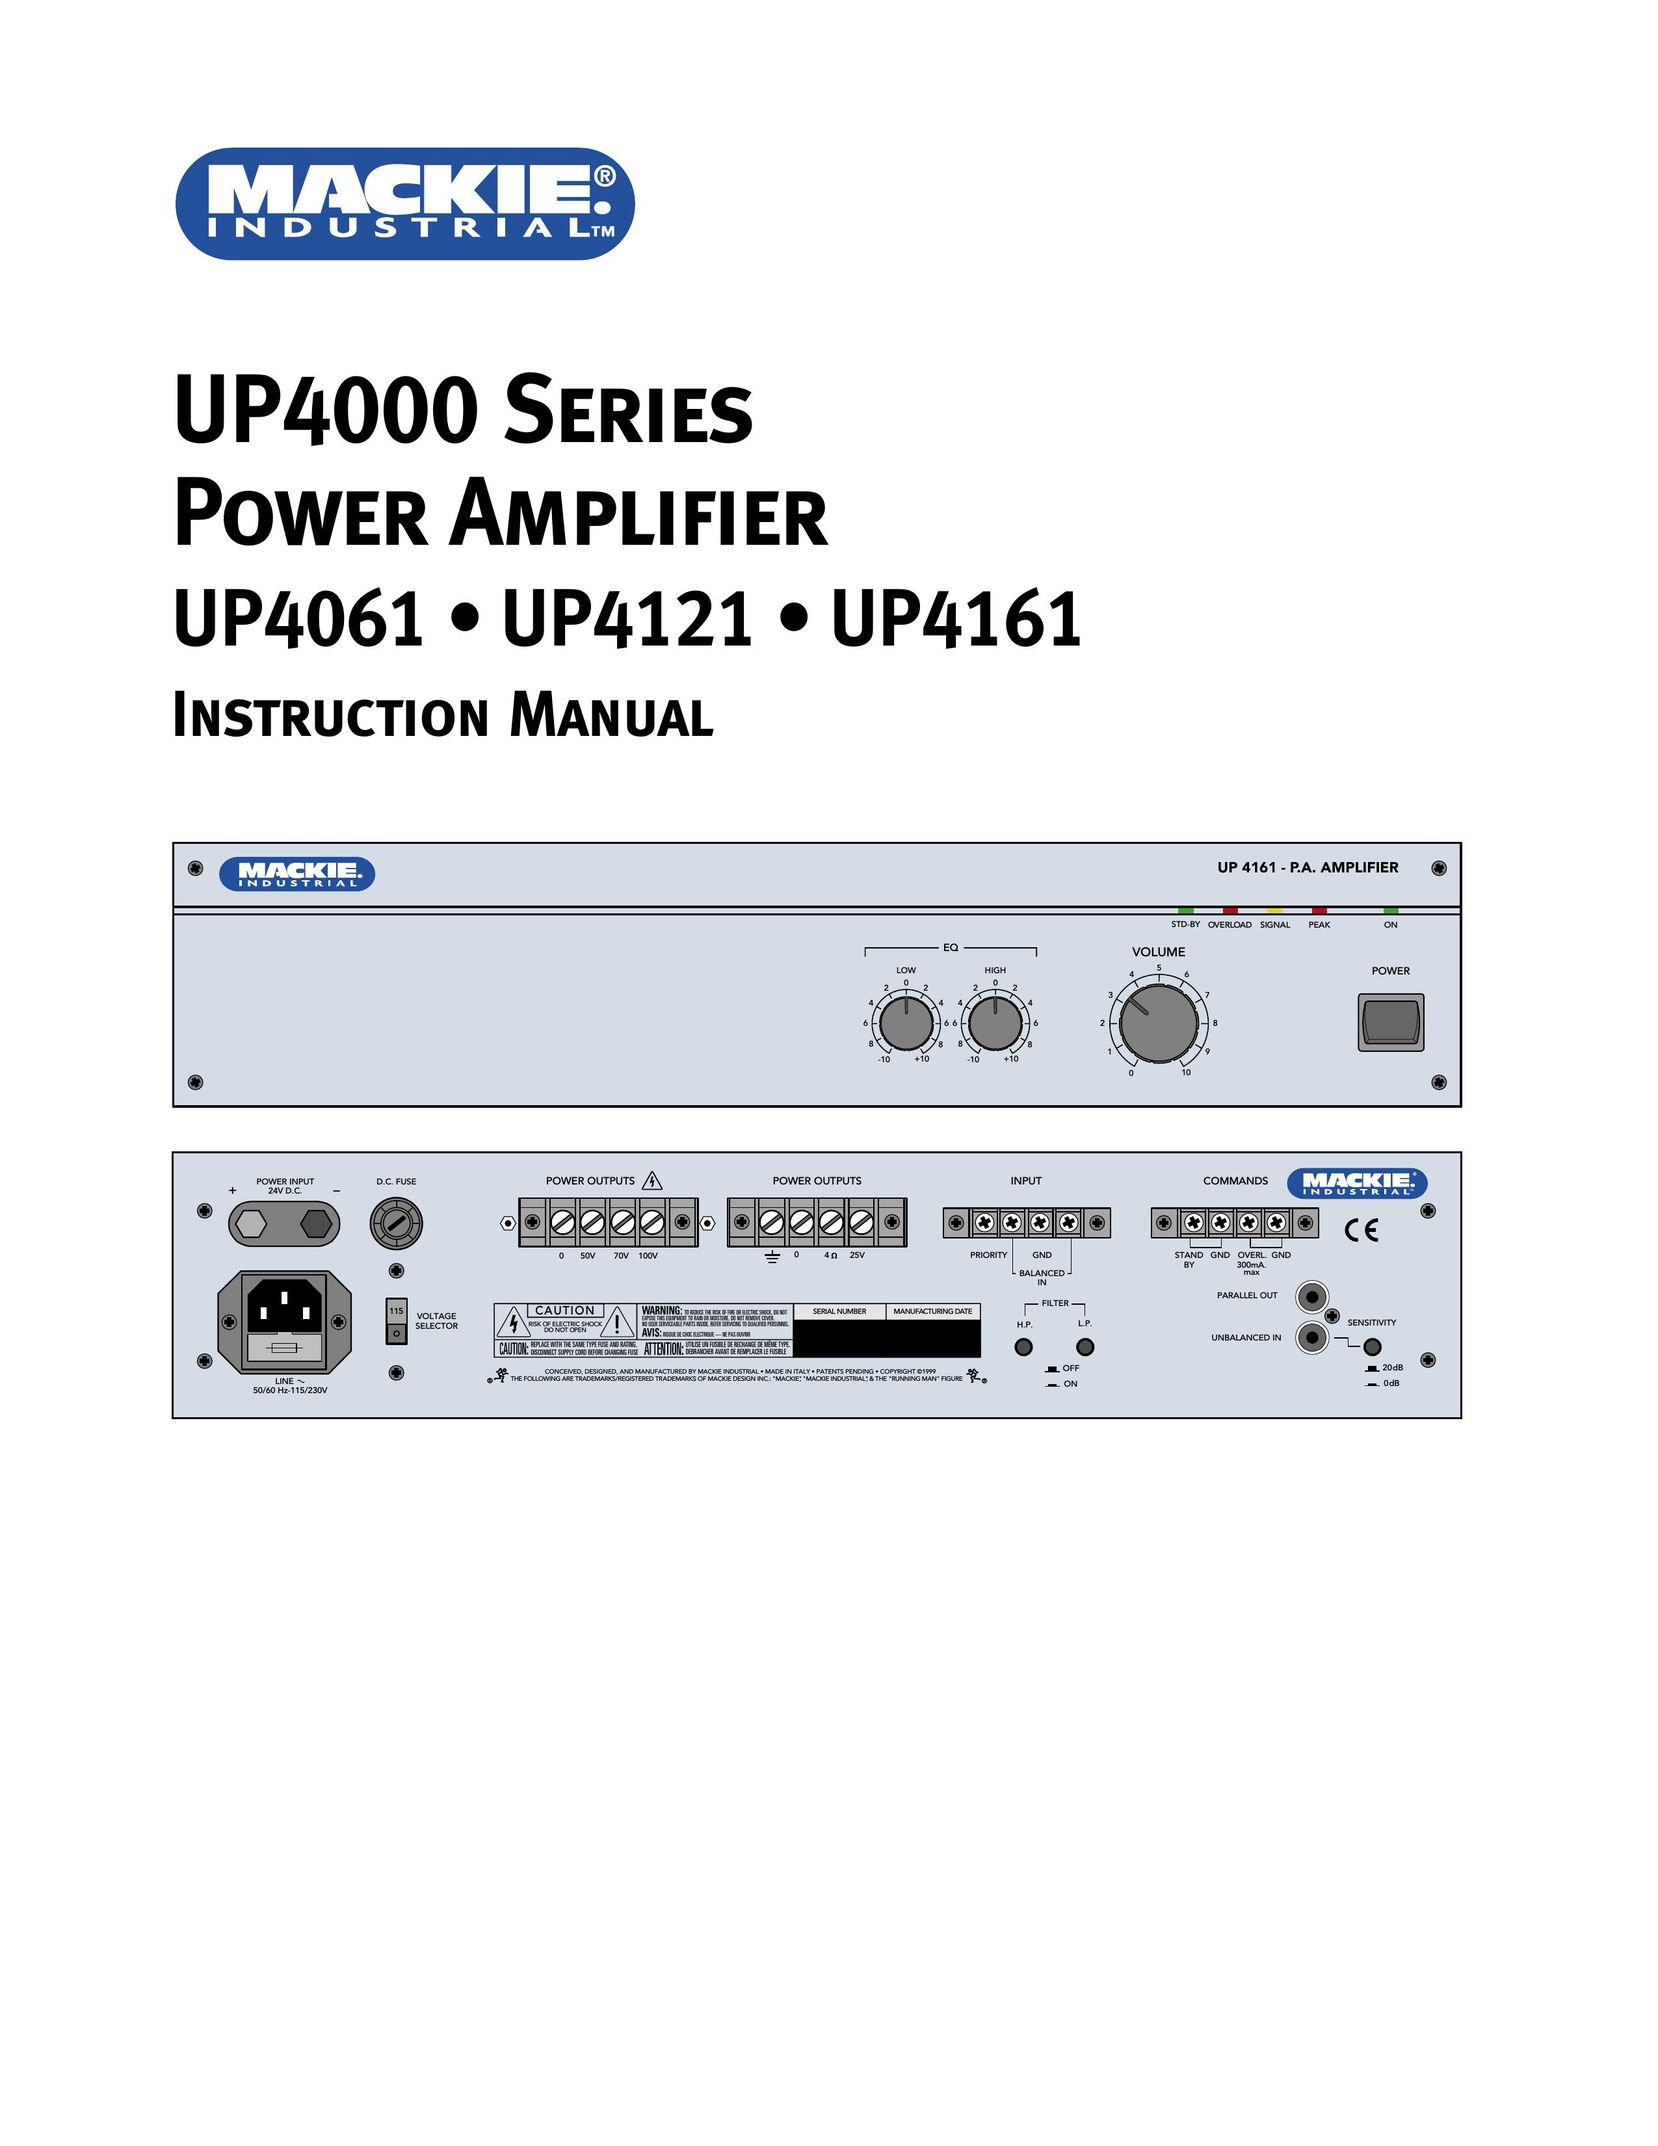 Mackie UP4121 Stereo Amplifier User Manual